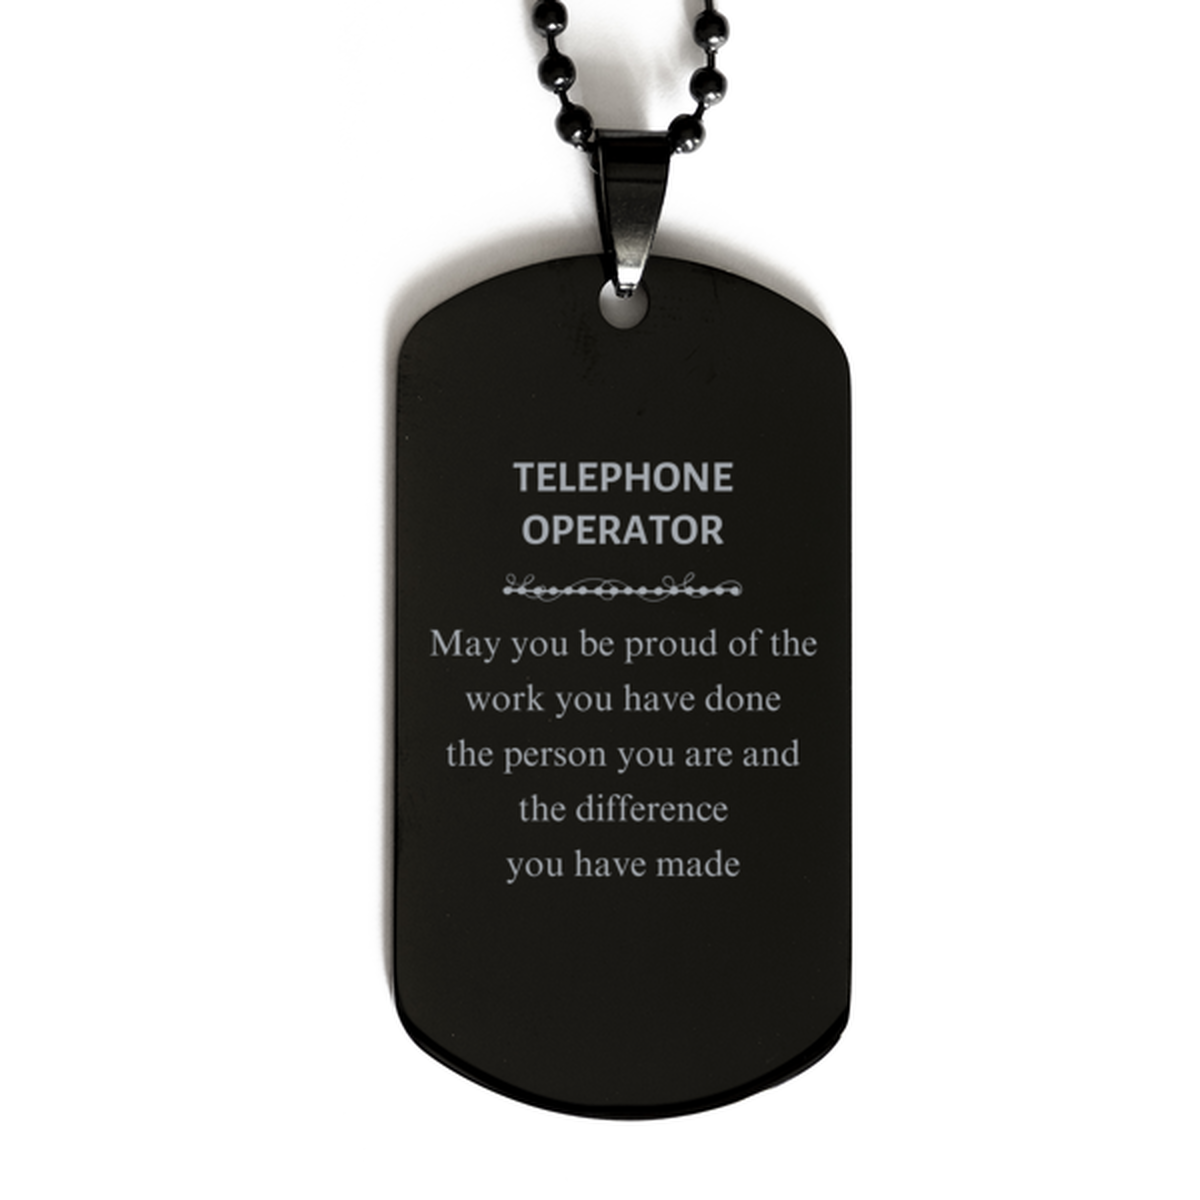 Telephone Operator May you be proud of the work you have done, Retirement Telephone Operator Black Dog Tag for Colleague Appreciation Gifts Amazing for Telephone Operator